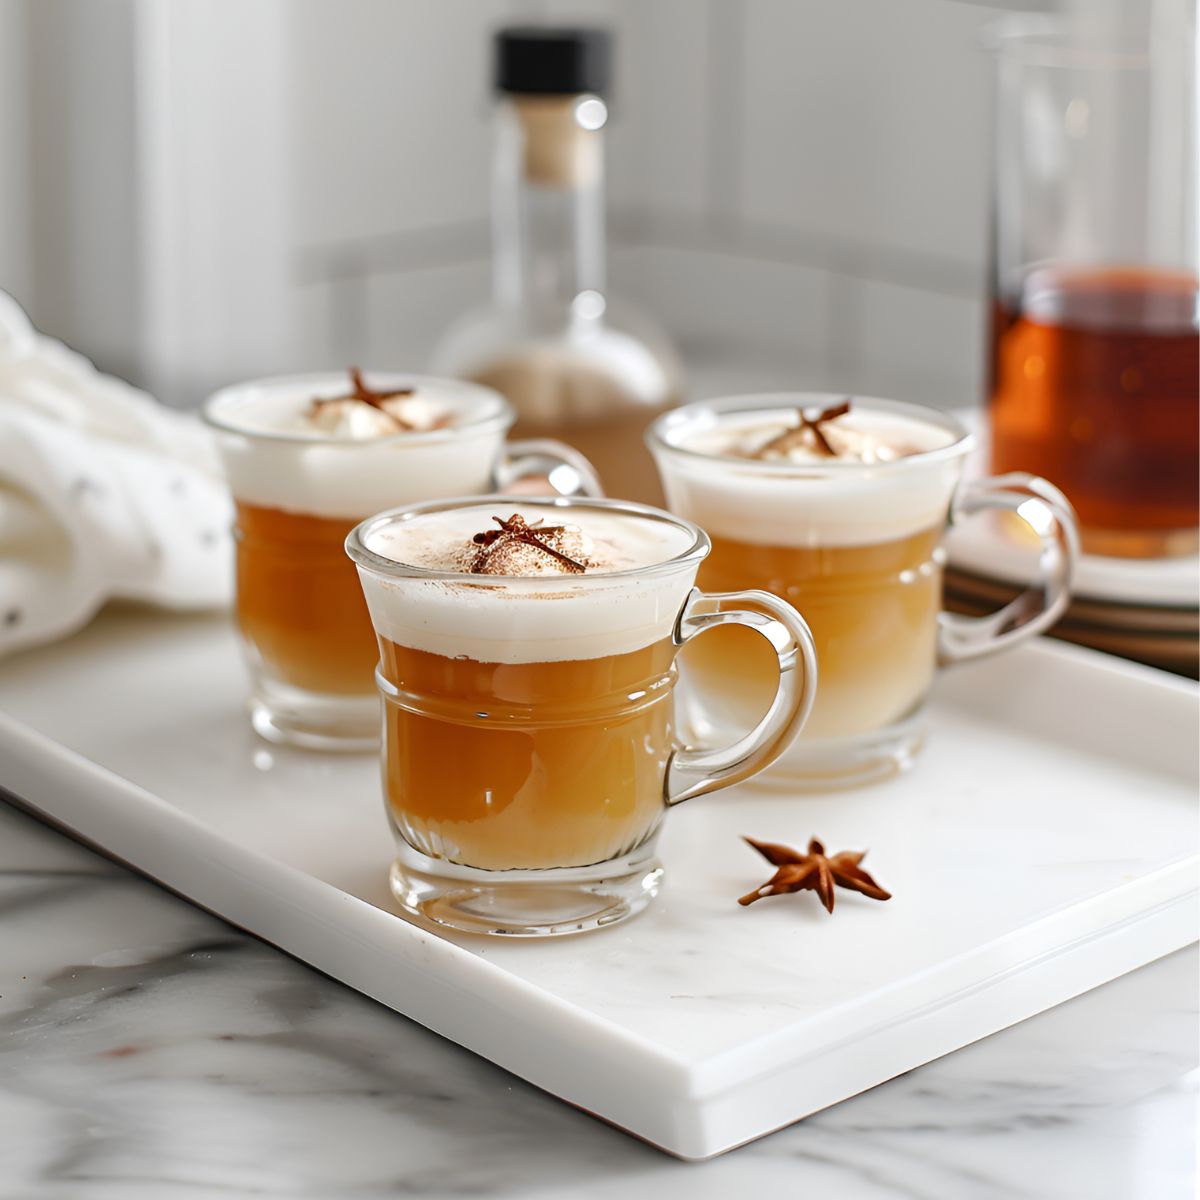 Three Glasses of Hot Buttered Rum on a White Cutting Board with Star Anise for Garnish and Bottles of Rum in the Background